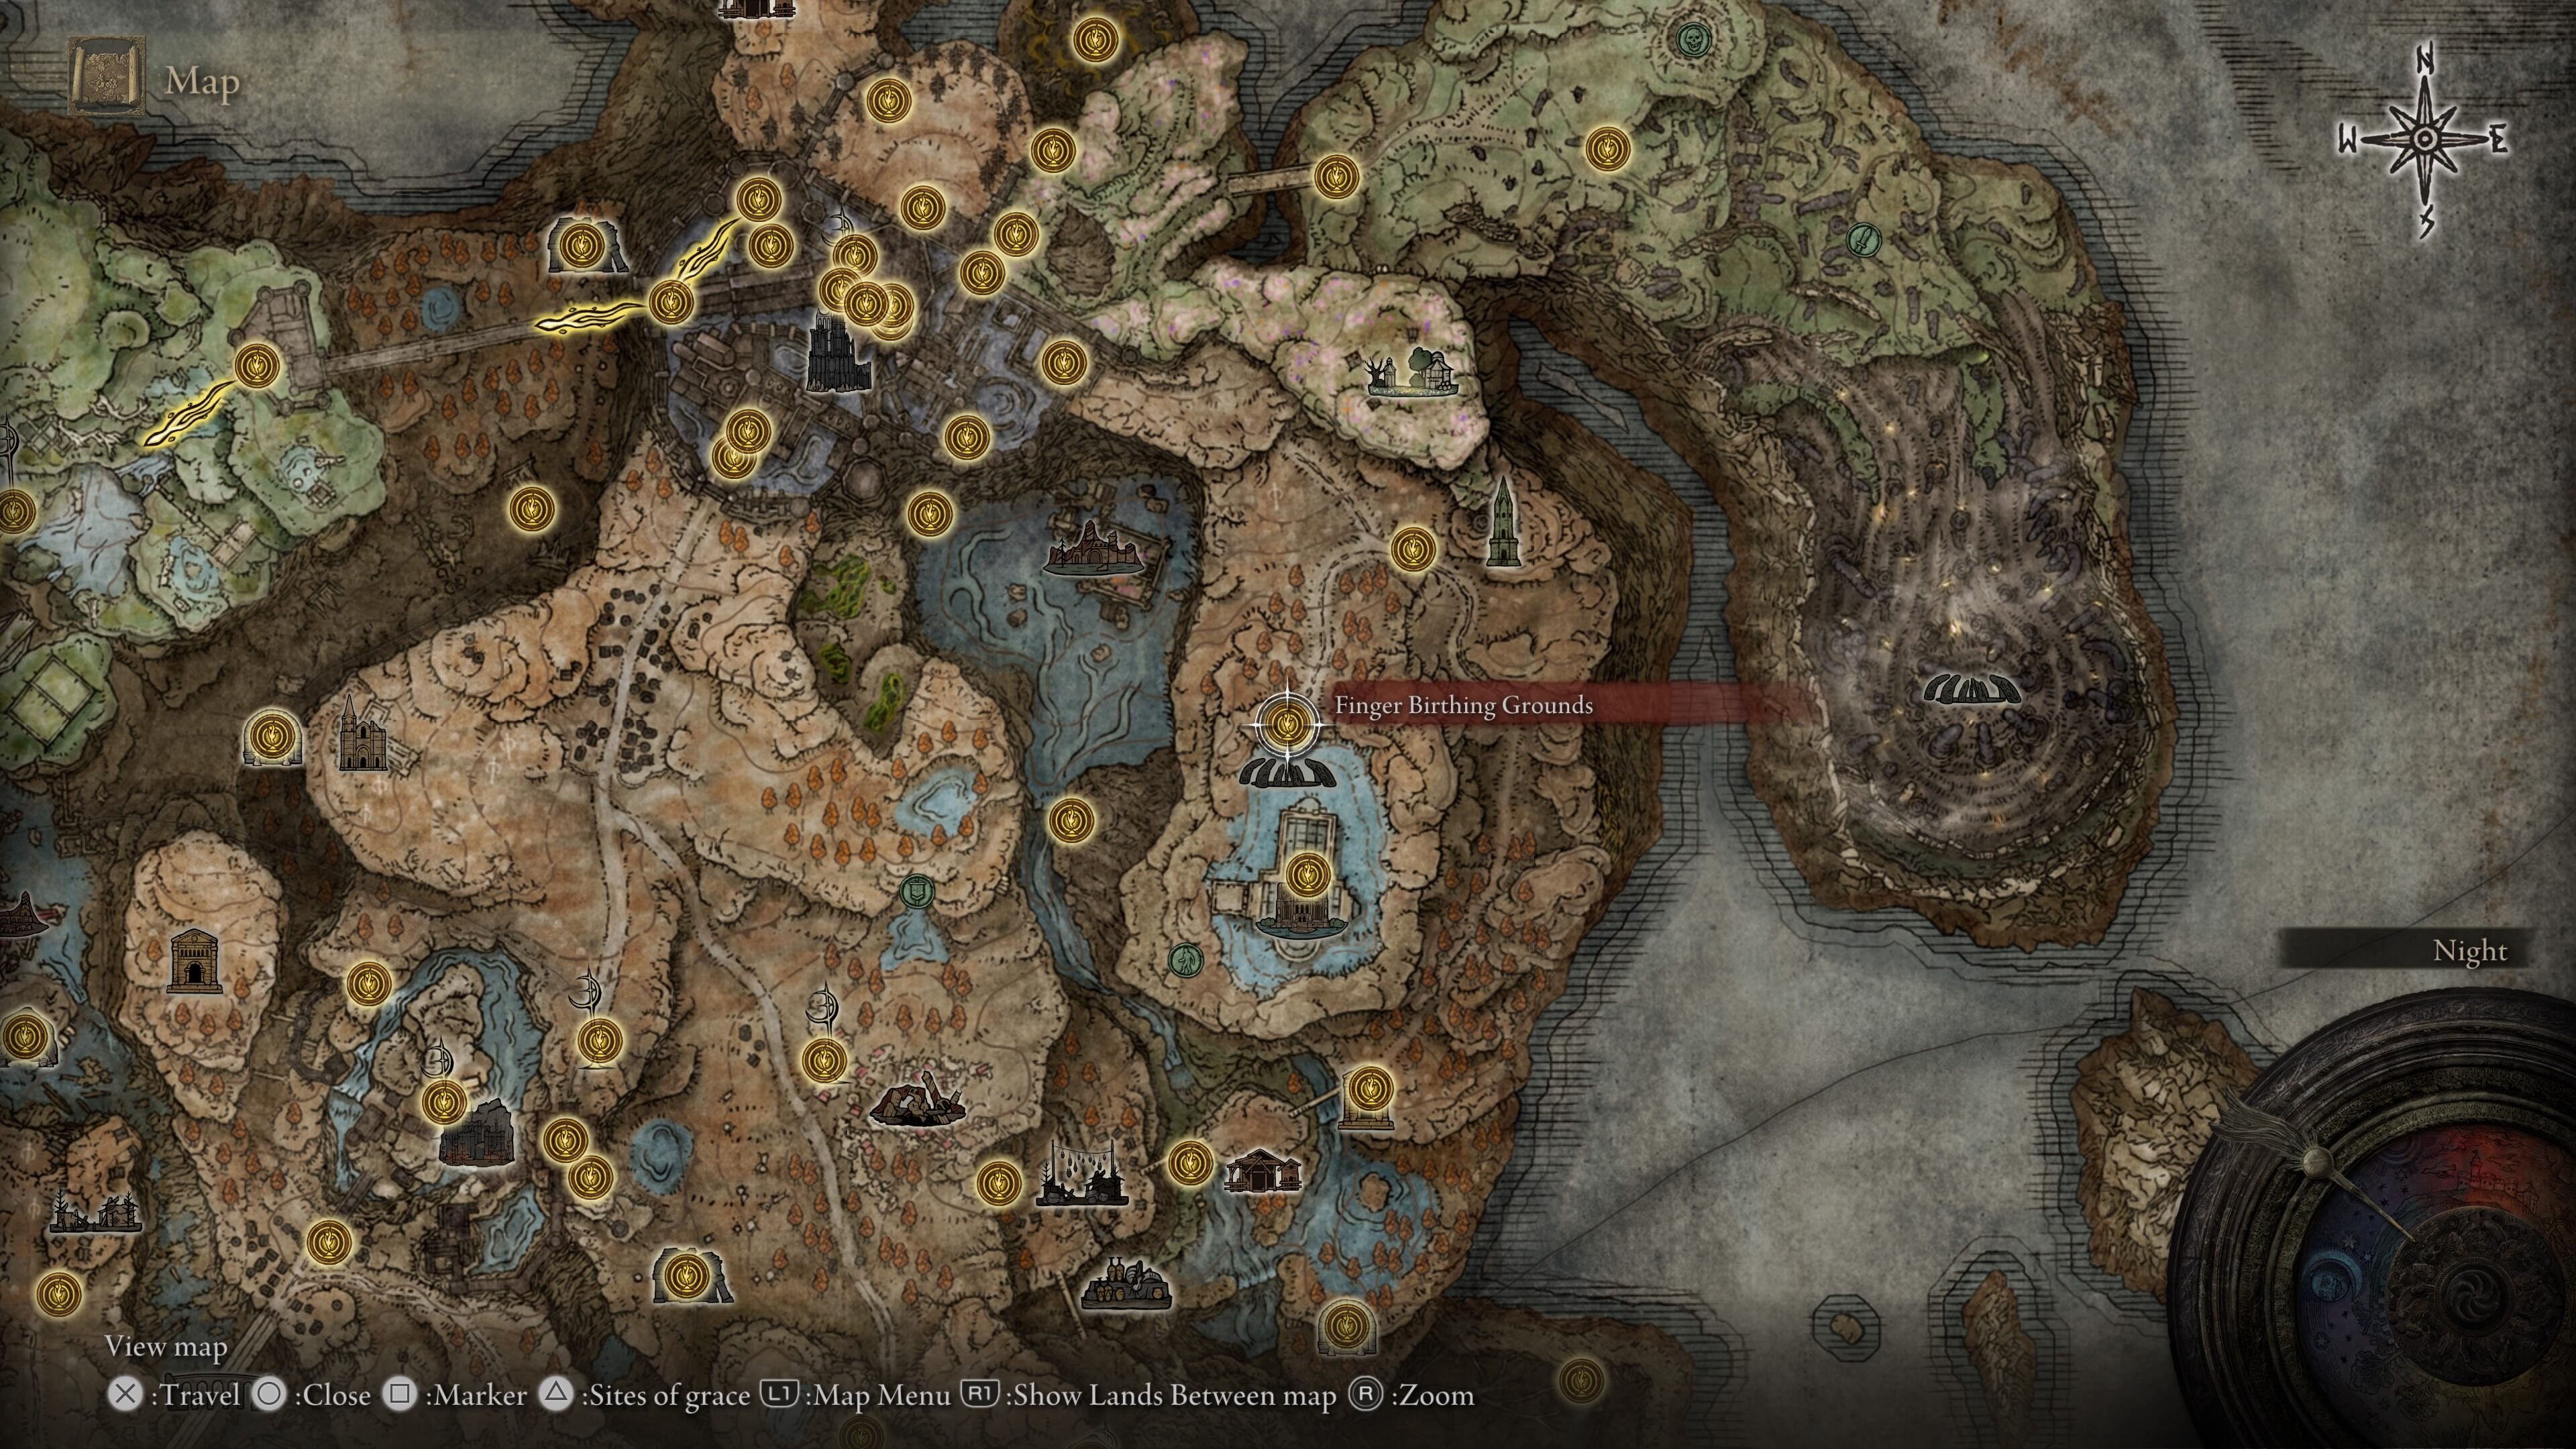 elden ring metyr mother of fingers boss guide - the map in shadow of the erdtree showing metyr boss location